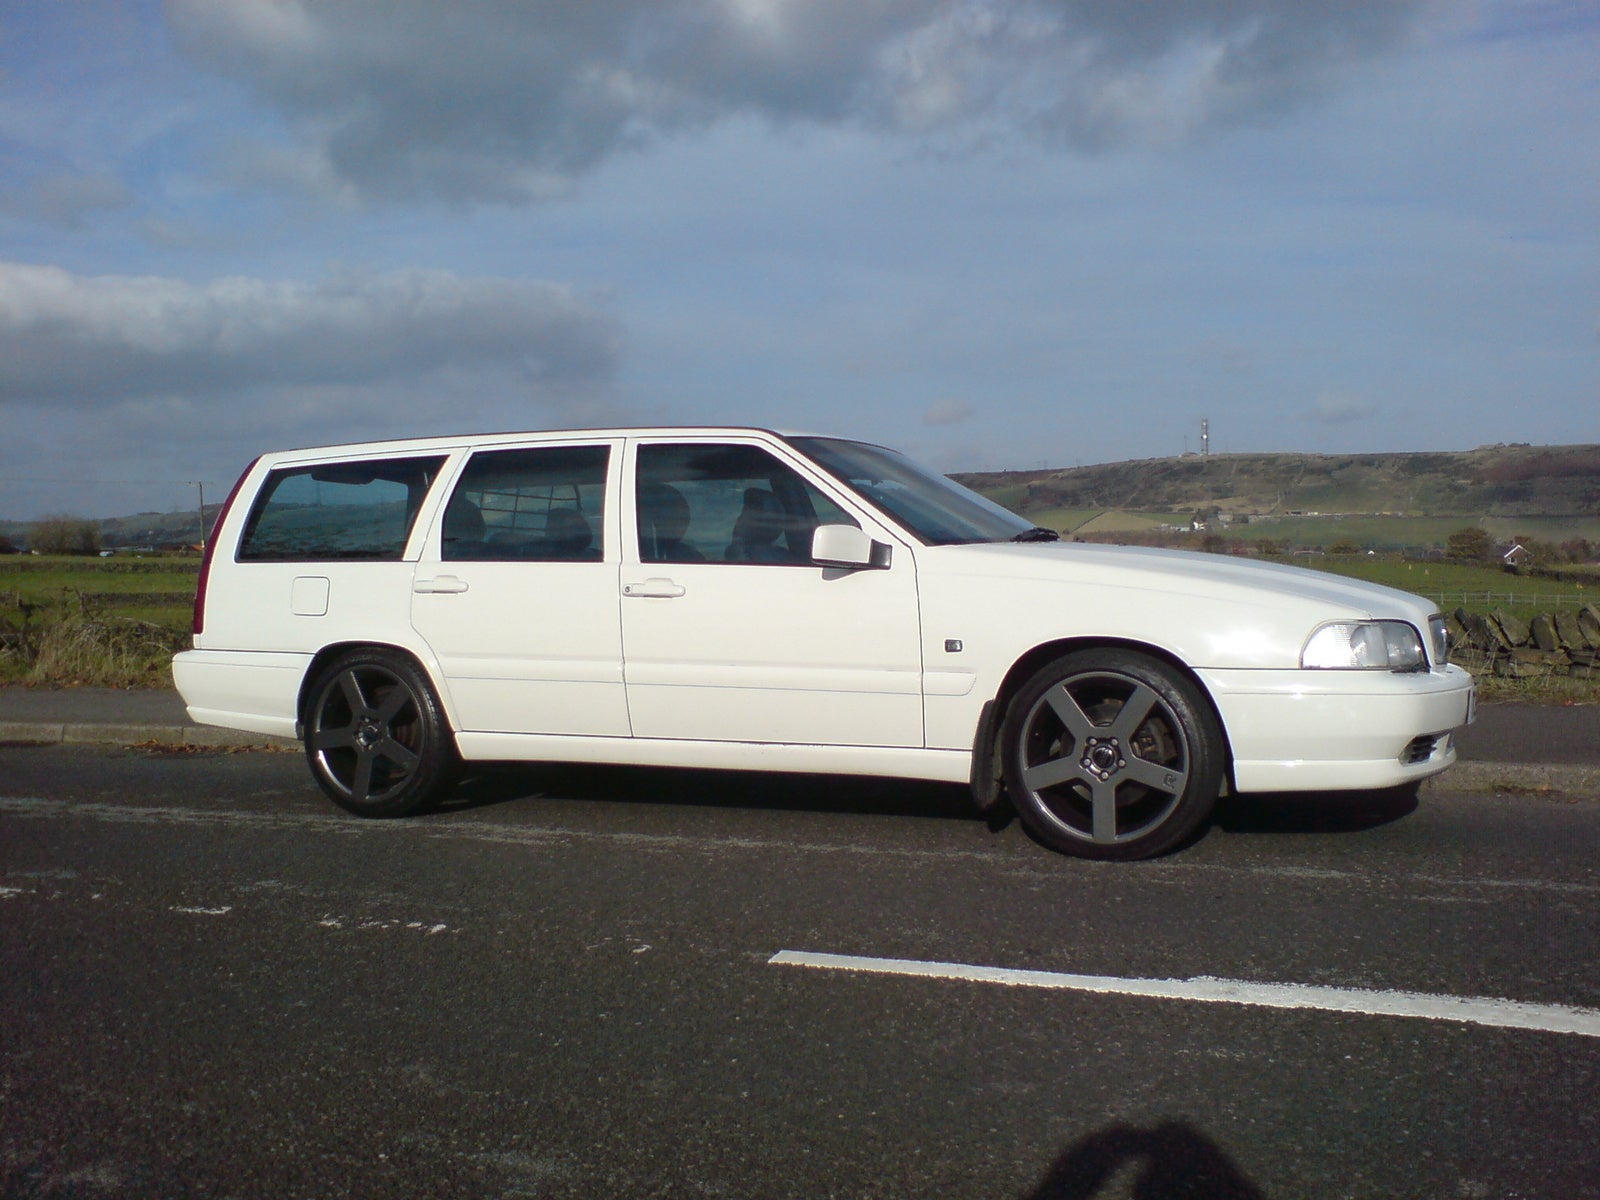 Volvo   on Volvo V70 4 Dr T5 Turbo Wagon Picture View Garage Simon Used To Own